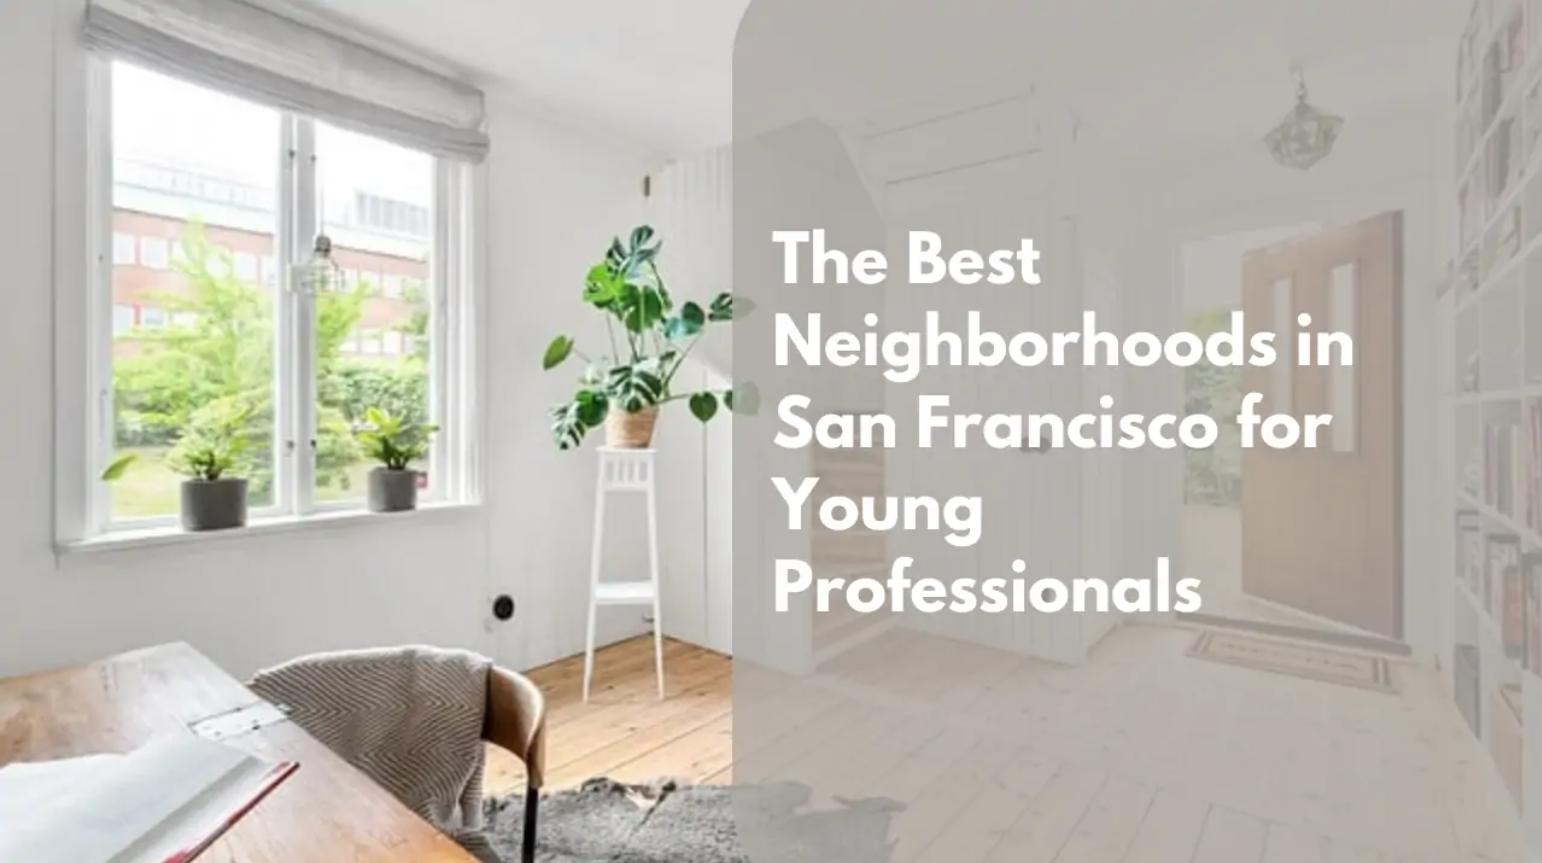 The Best neighborhoods in San Francisco for Young Professionals